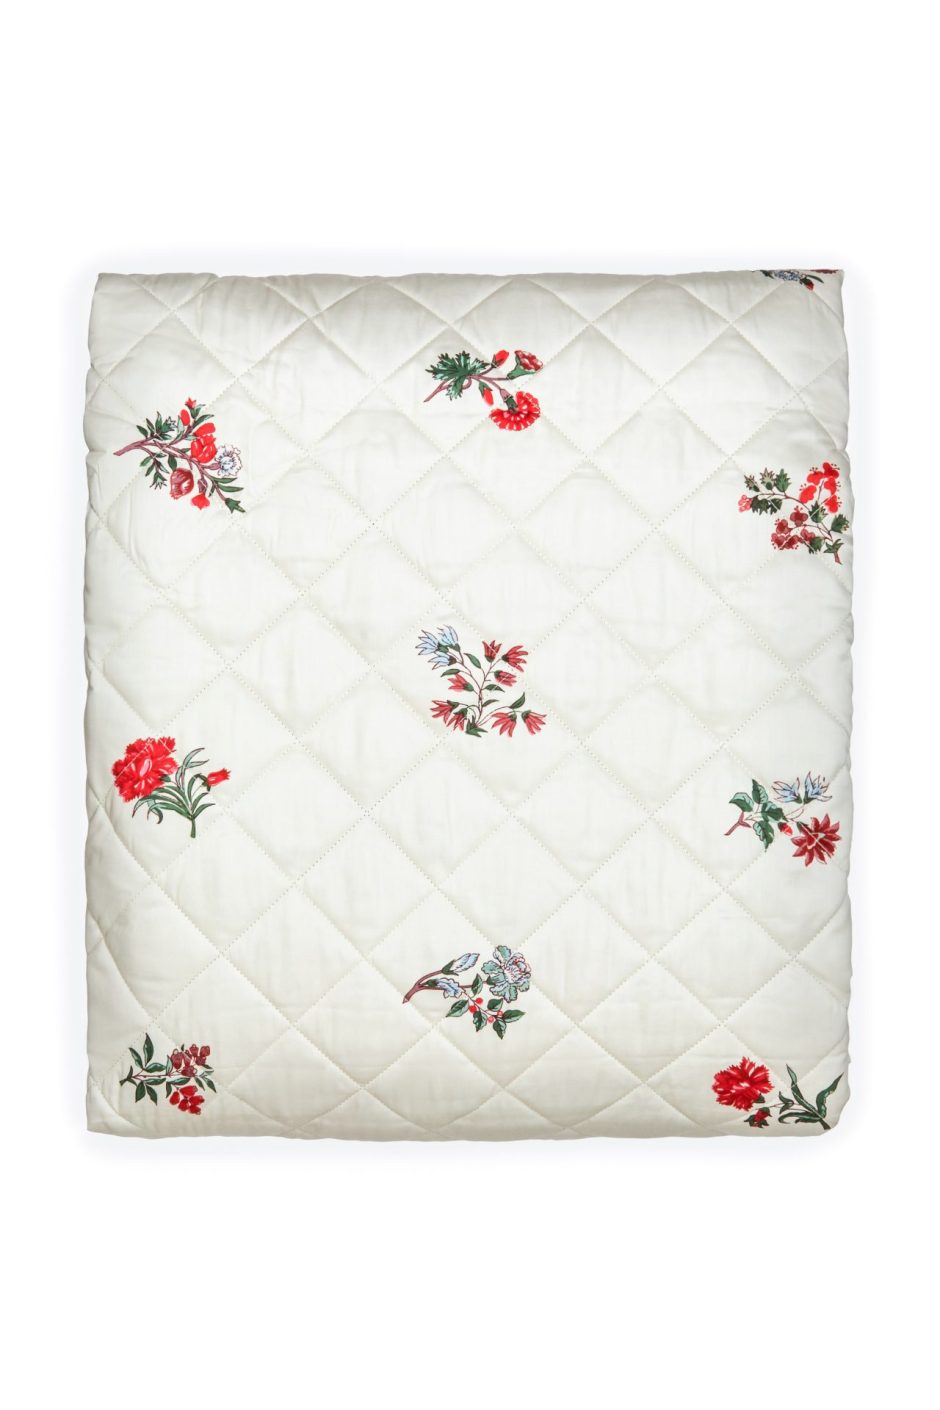 HERBARIUM QUILTED BED COVER